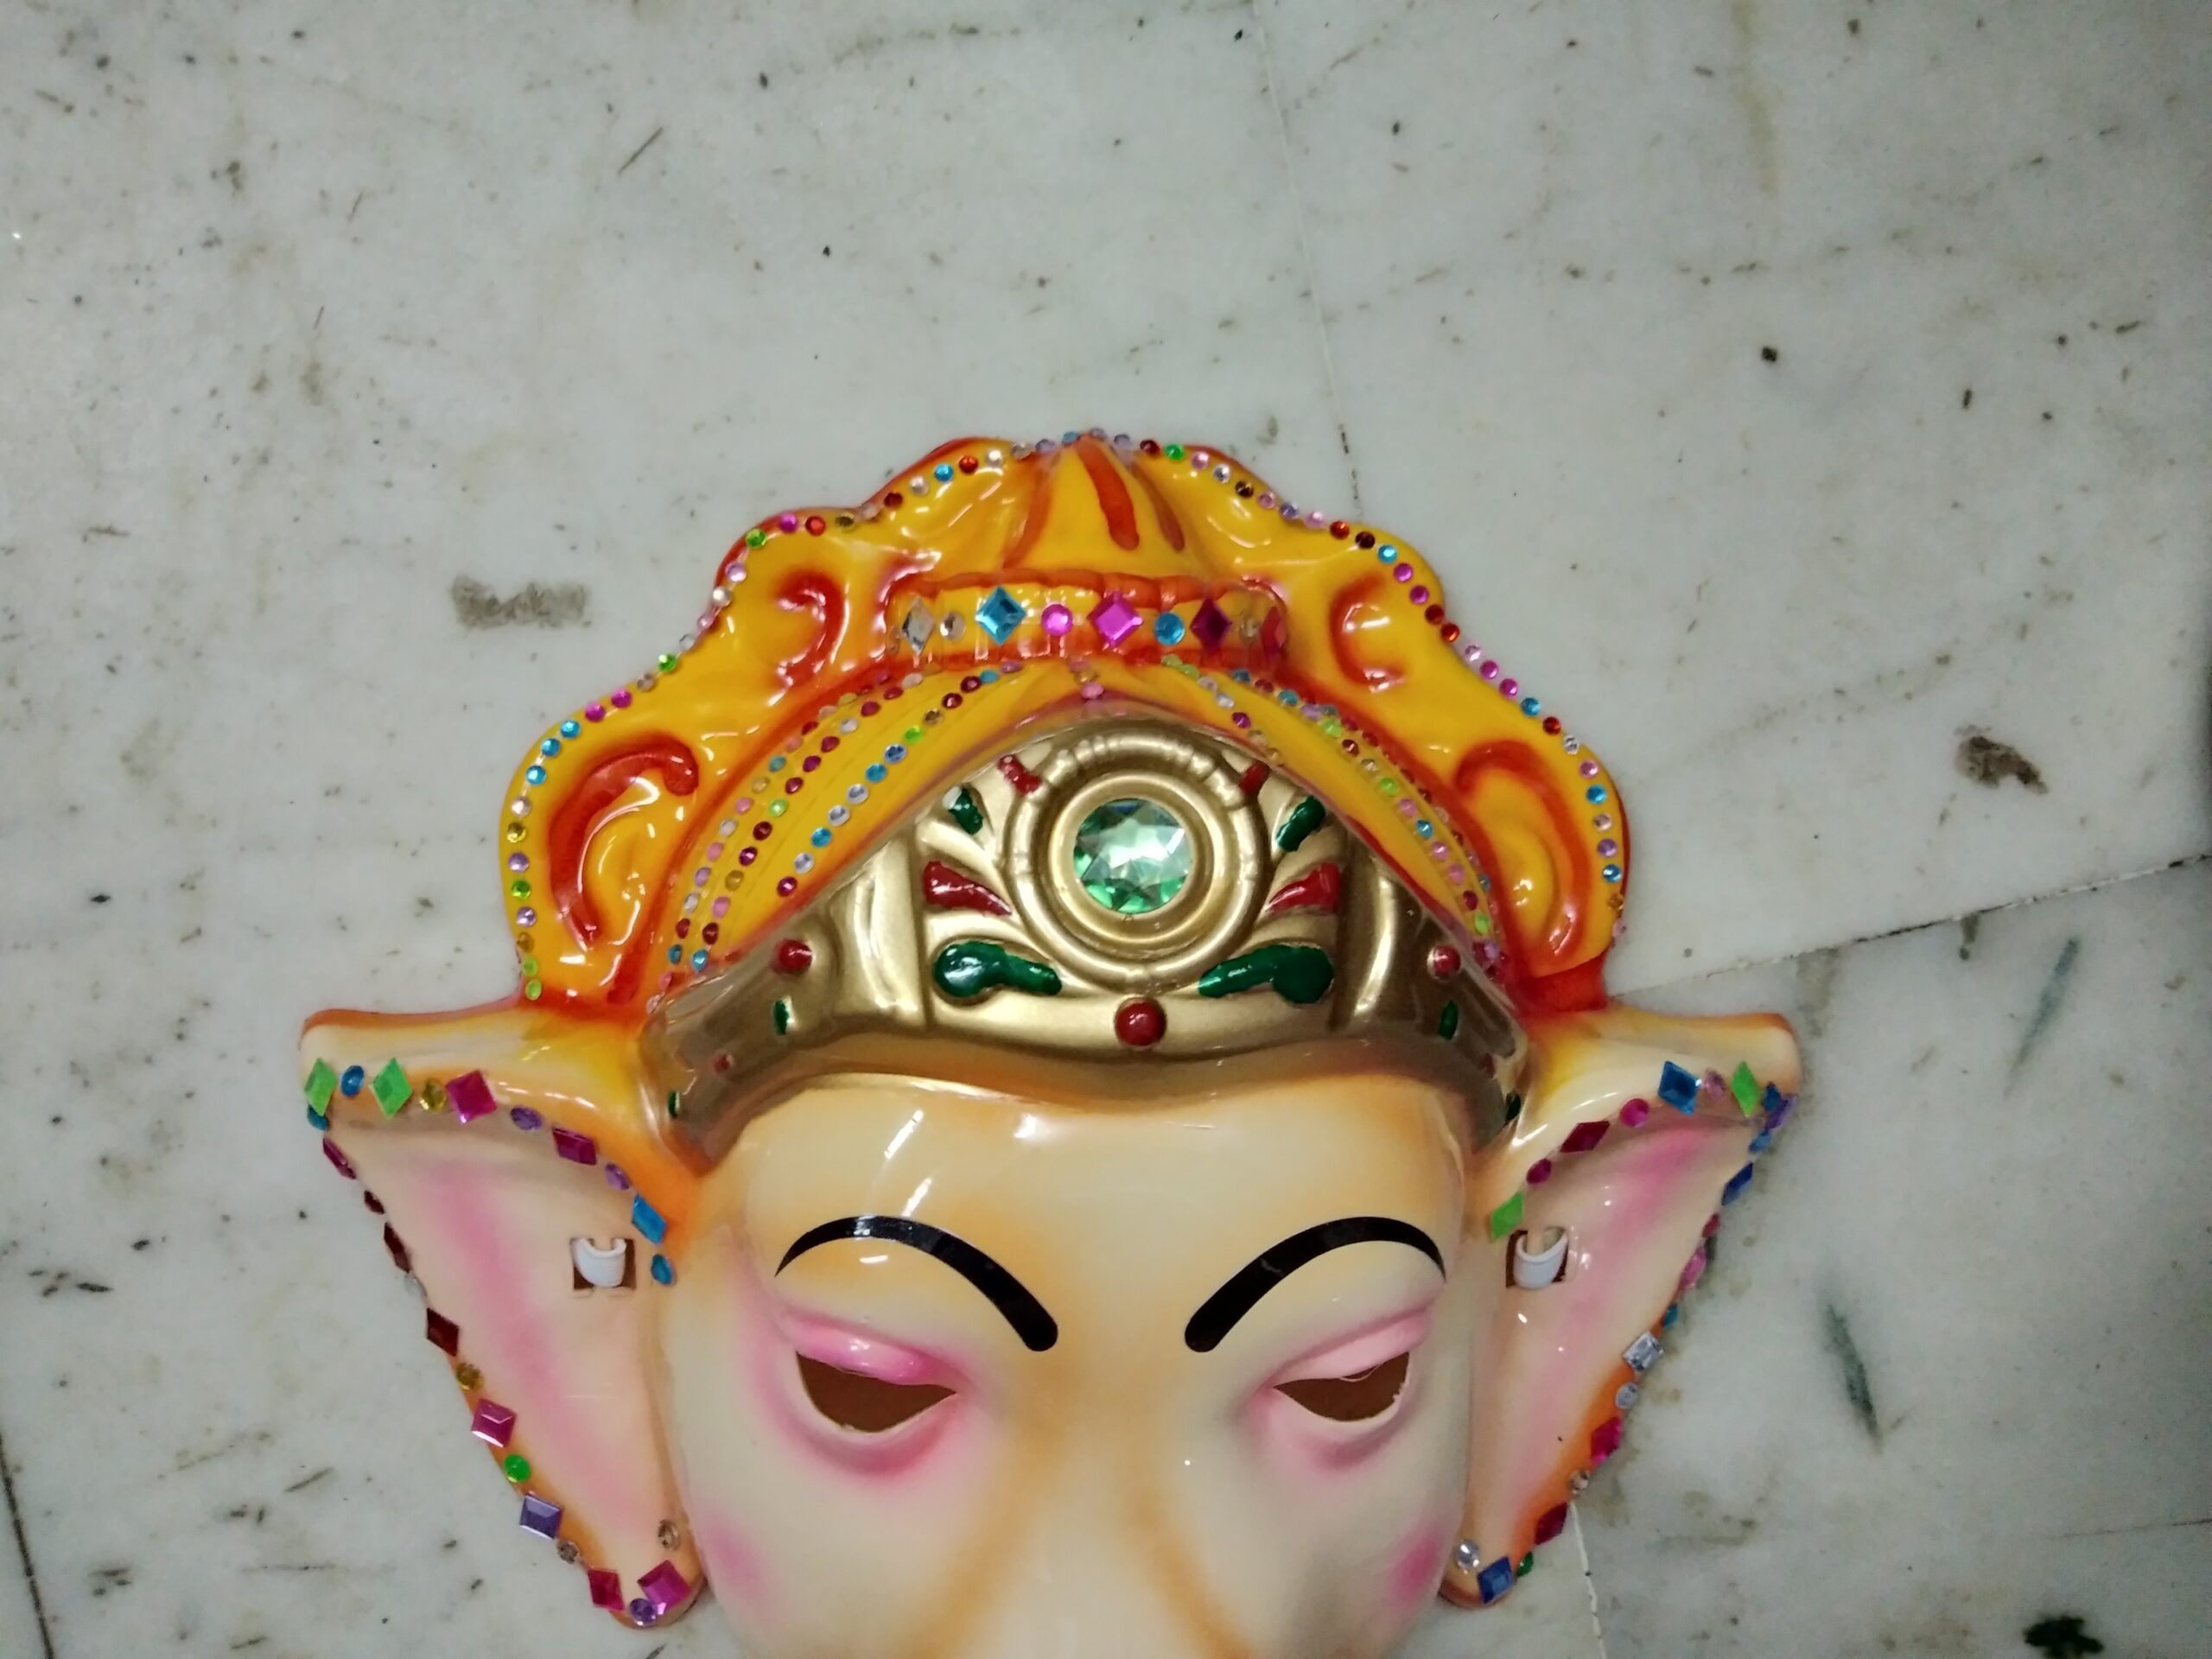 Buy My Friend Ganesha Cartoon Mascot for Adults in Free Size Online in India